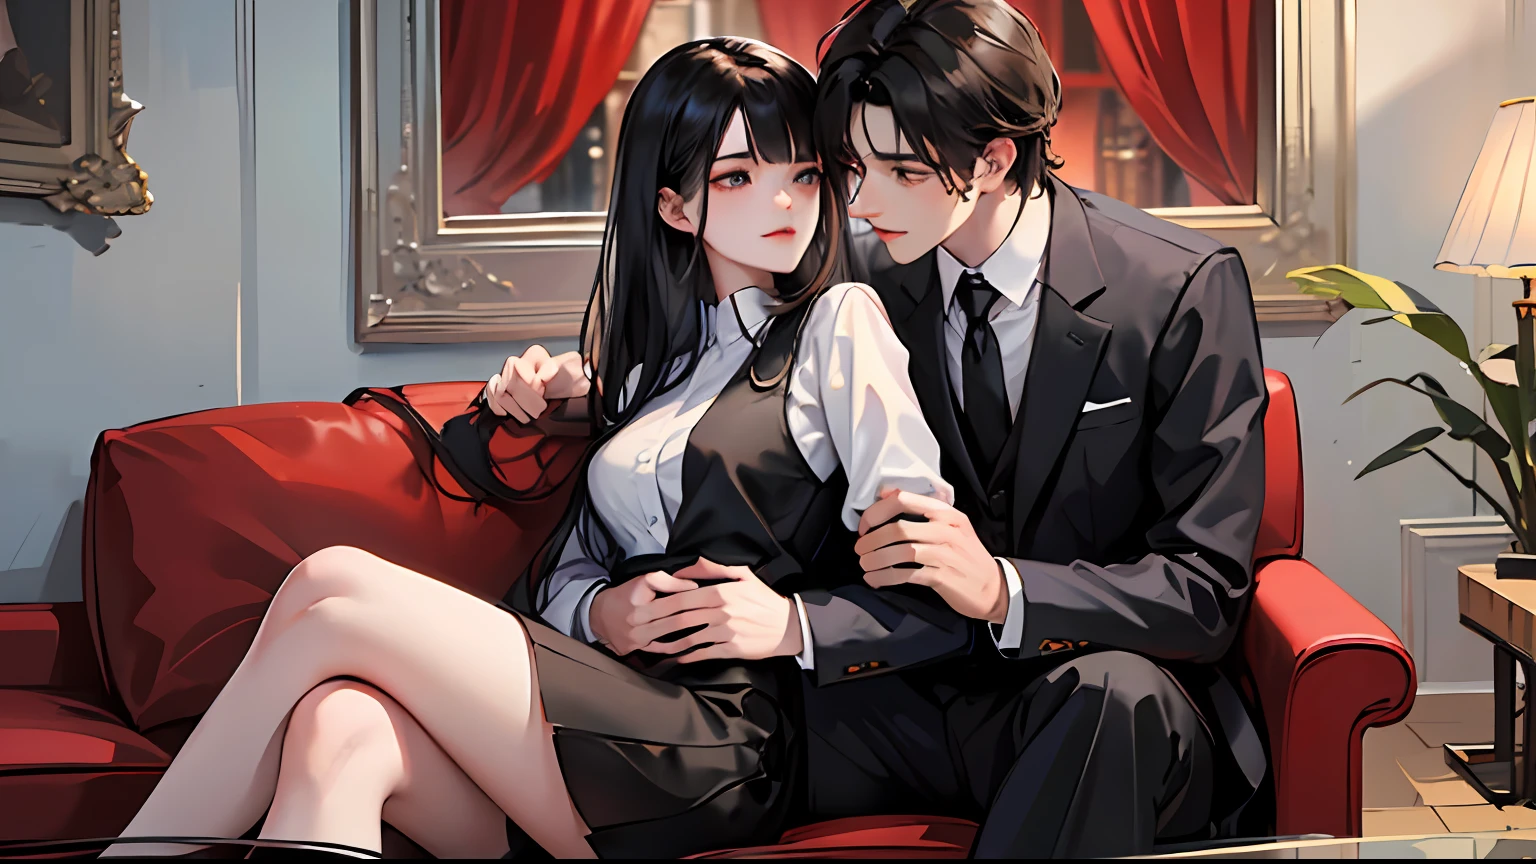 A woman with black long hair, no bangs, wear white shirt, black vest and black skirt sit on a man’s laps. A man with short black hair, forehead hair, double bangs, wear black suit wrapped around a woman’s waist, no looking at view, in sofa, full body, 4k, high quality, they’re looking at each other